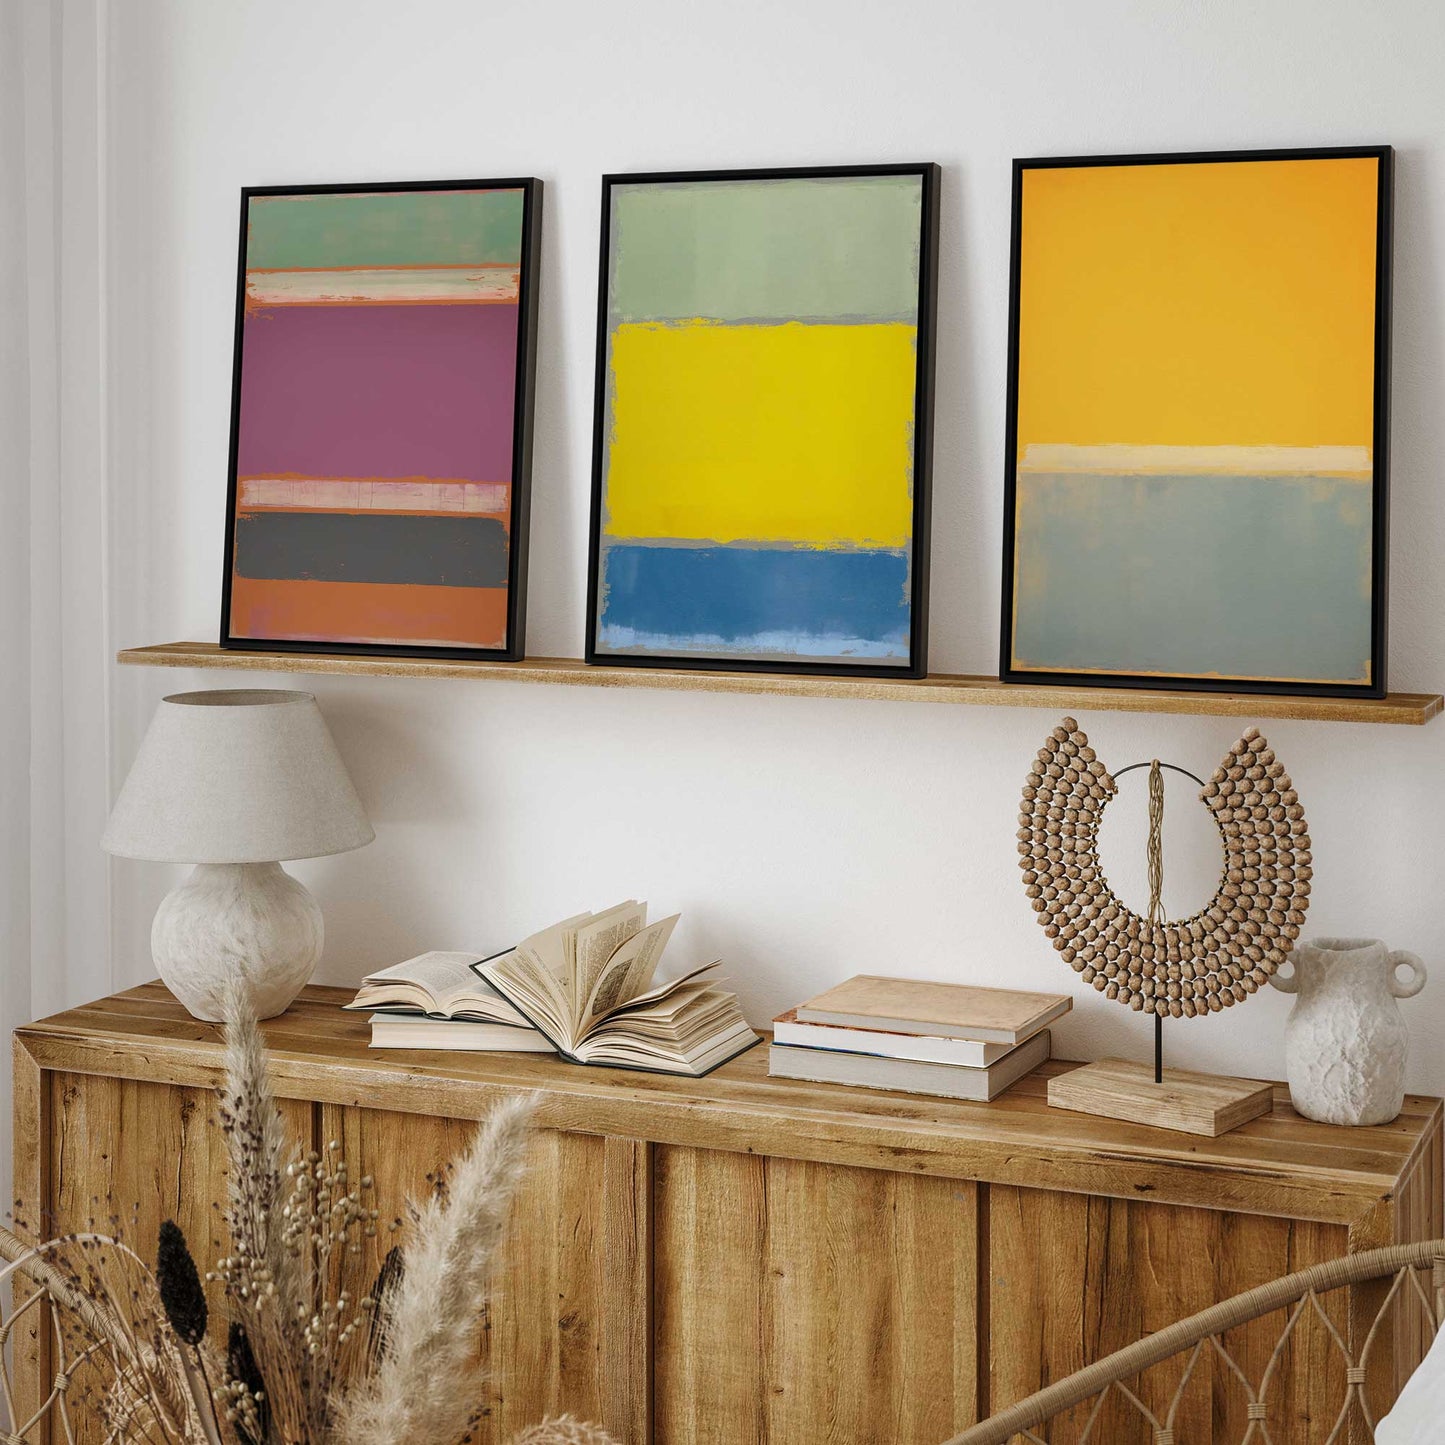 Sunfield Glow Triptych Set of 3 Print on Canvas